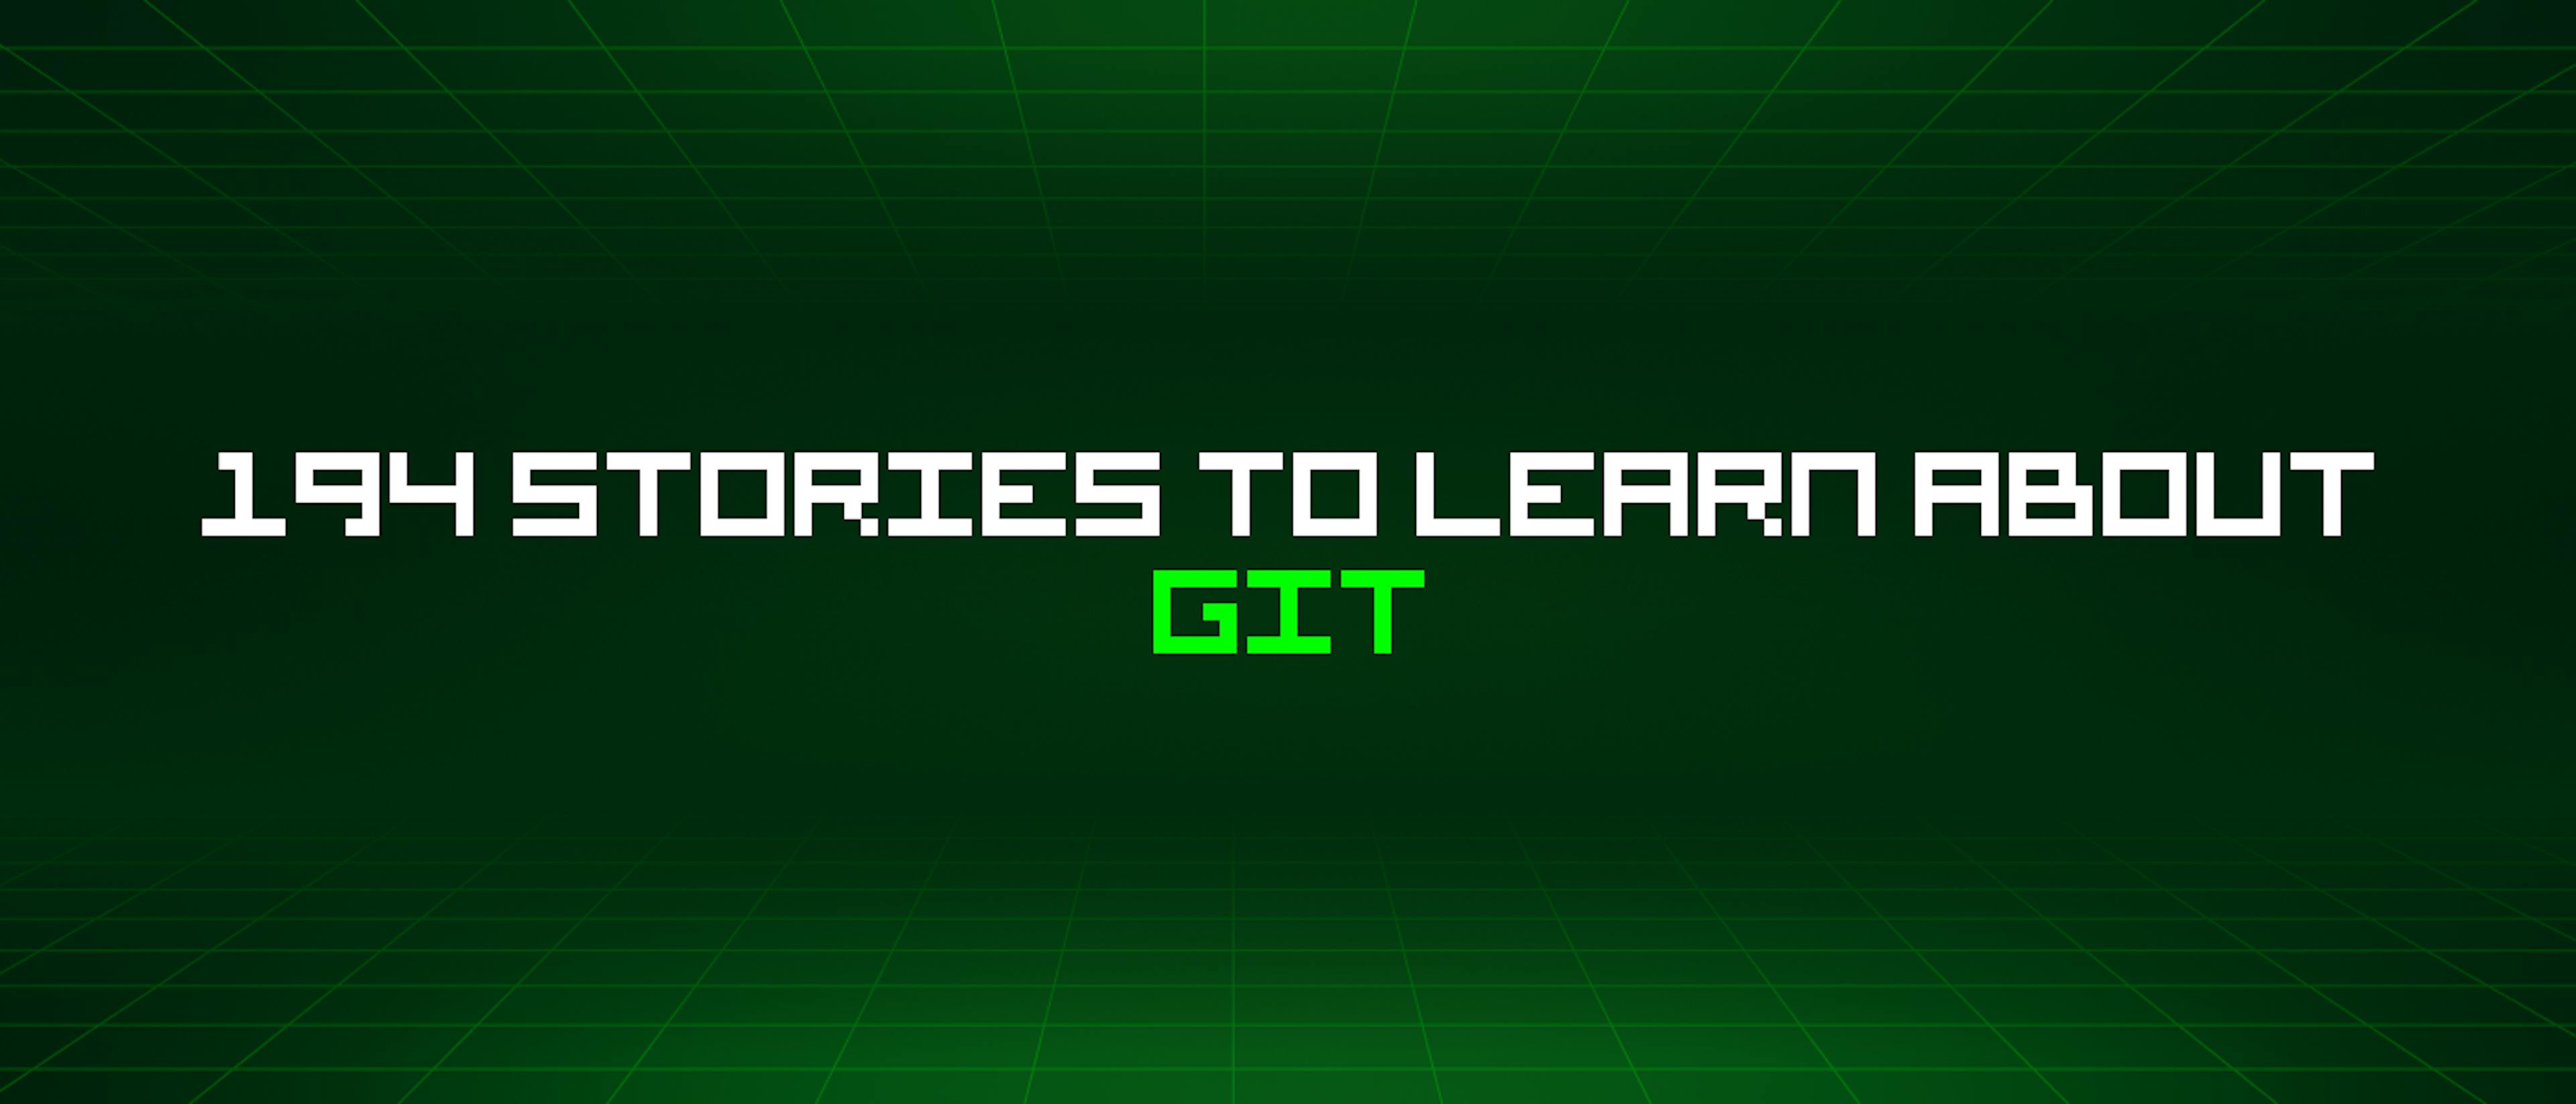 featured image - 194 Stories To Learn About Git